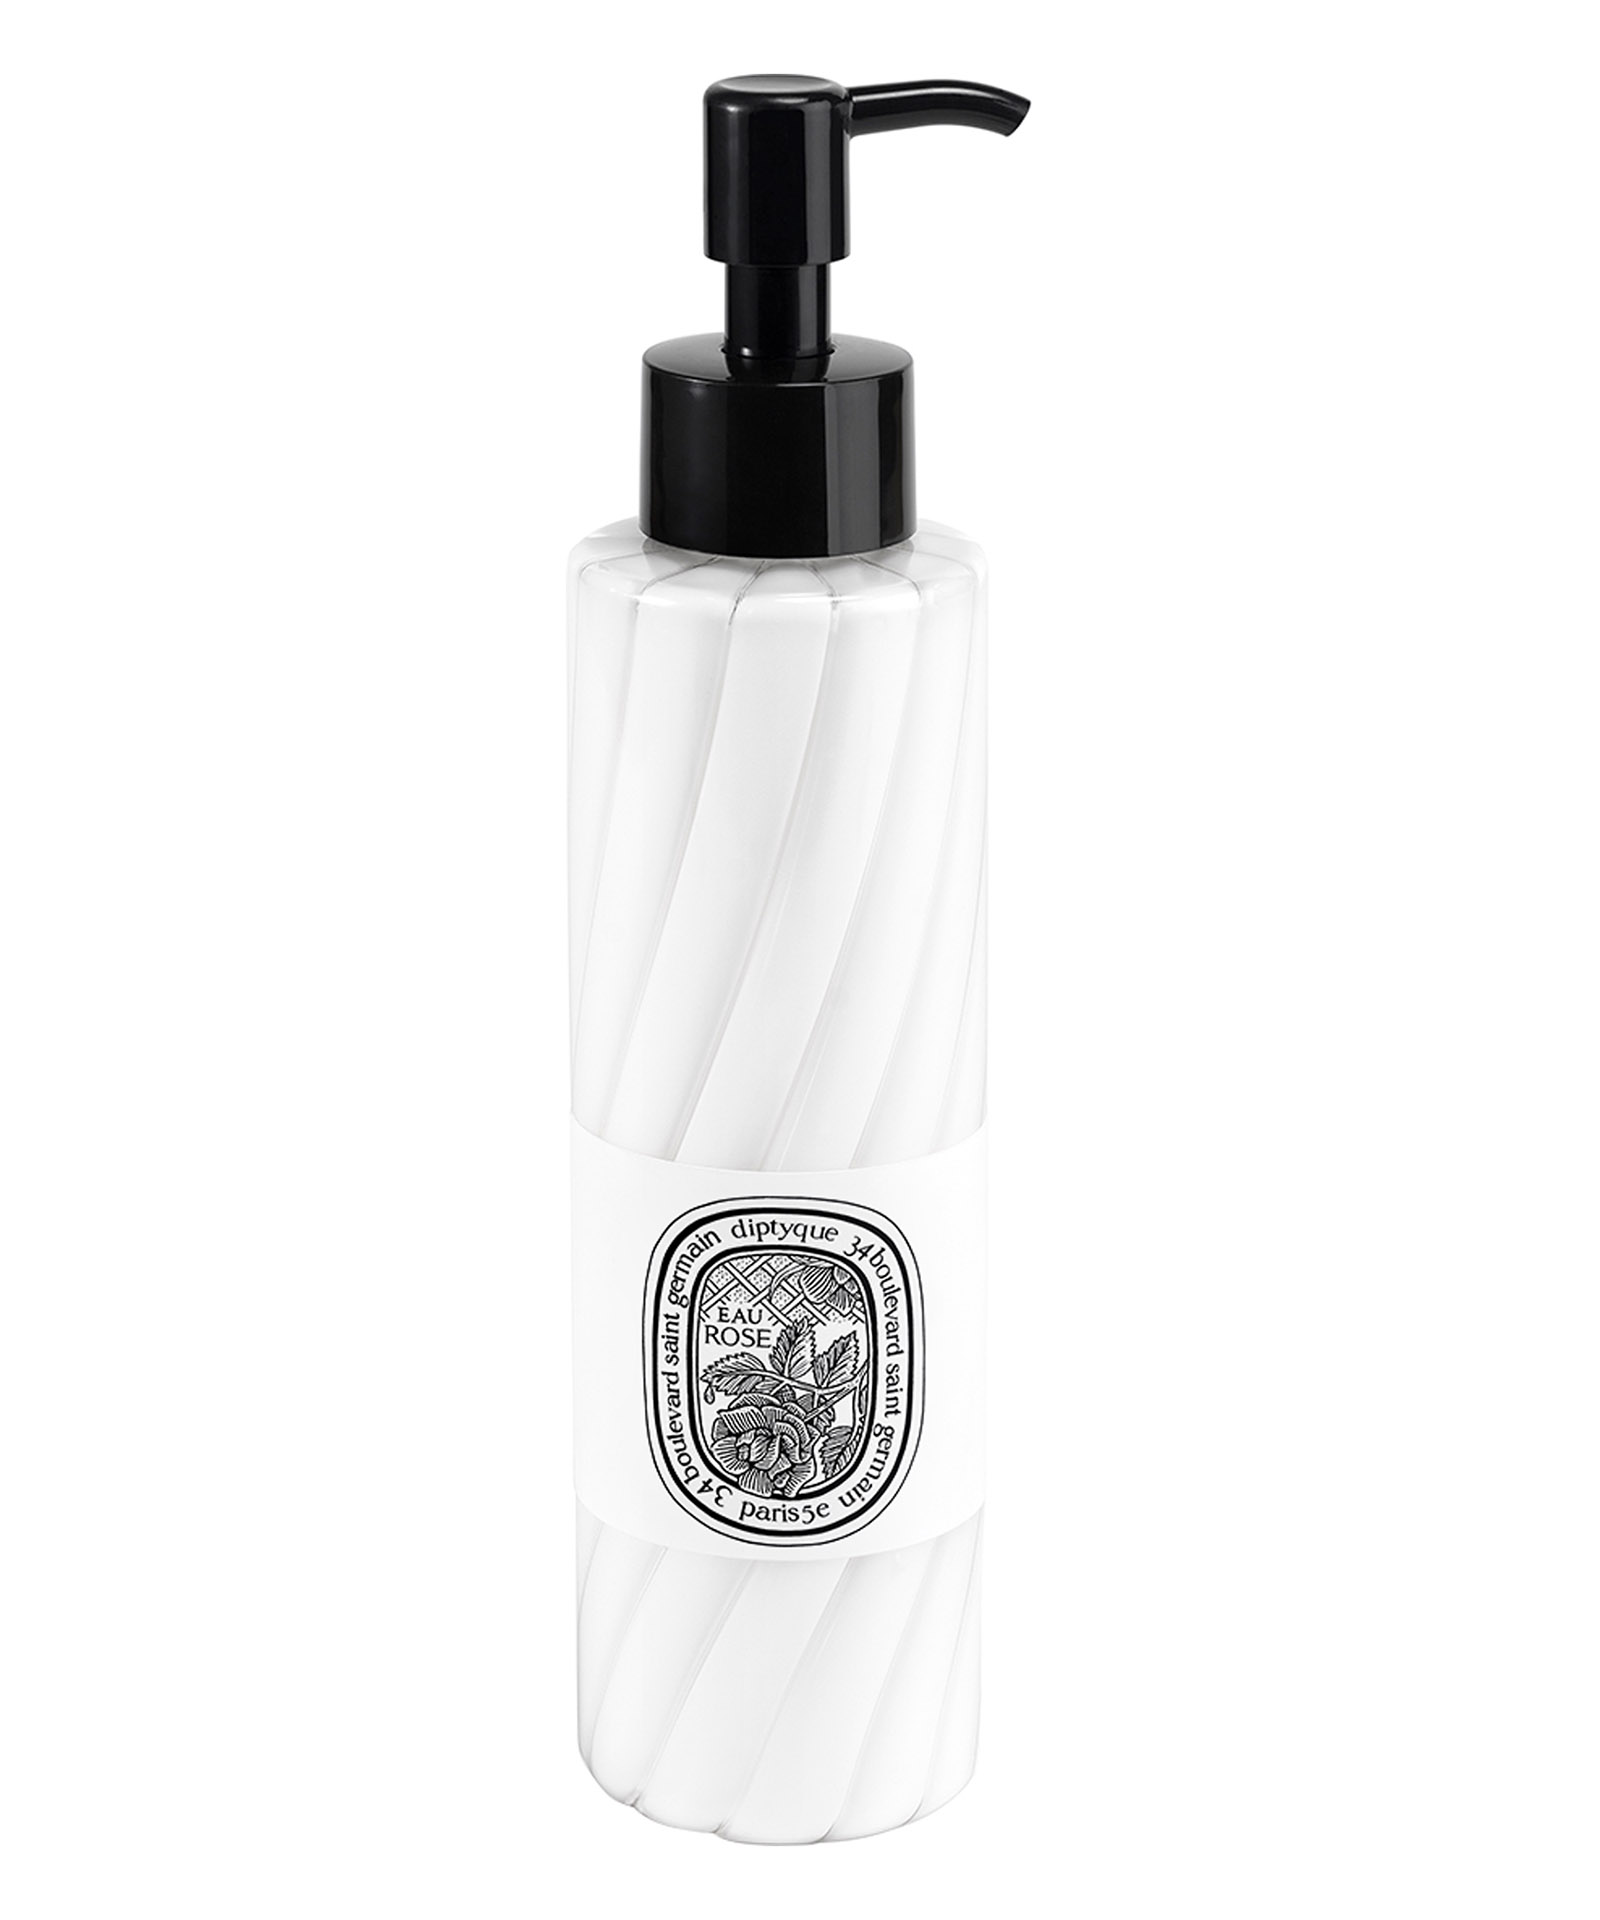 Diptyque Eau Rose Hand And Body Lotion 200 ml In White